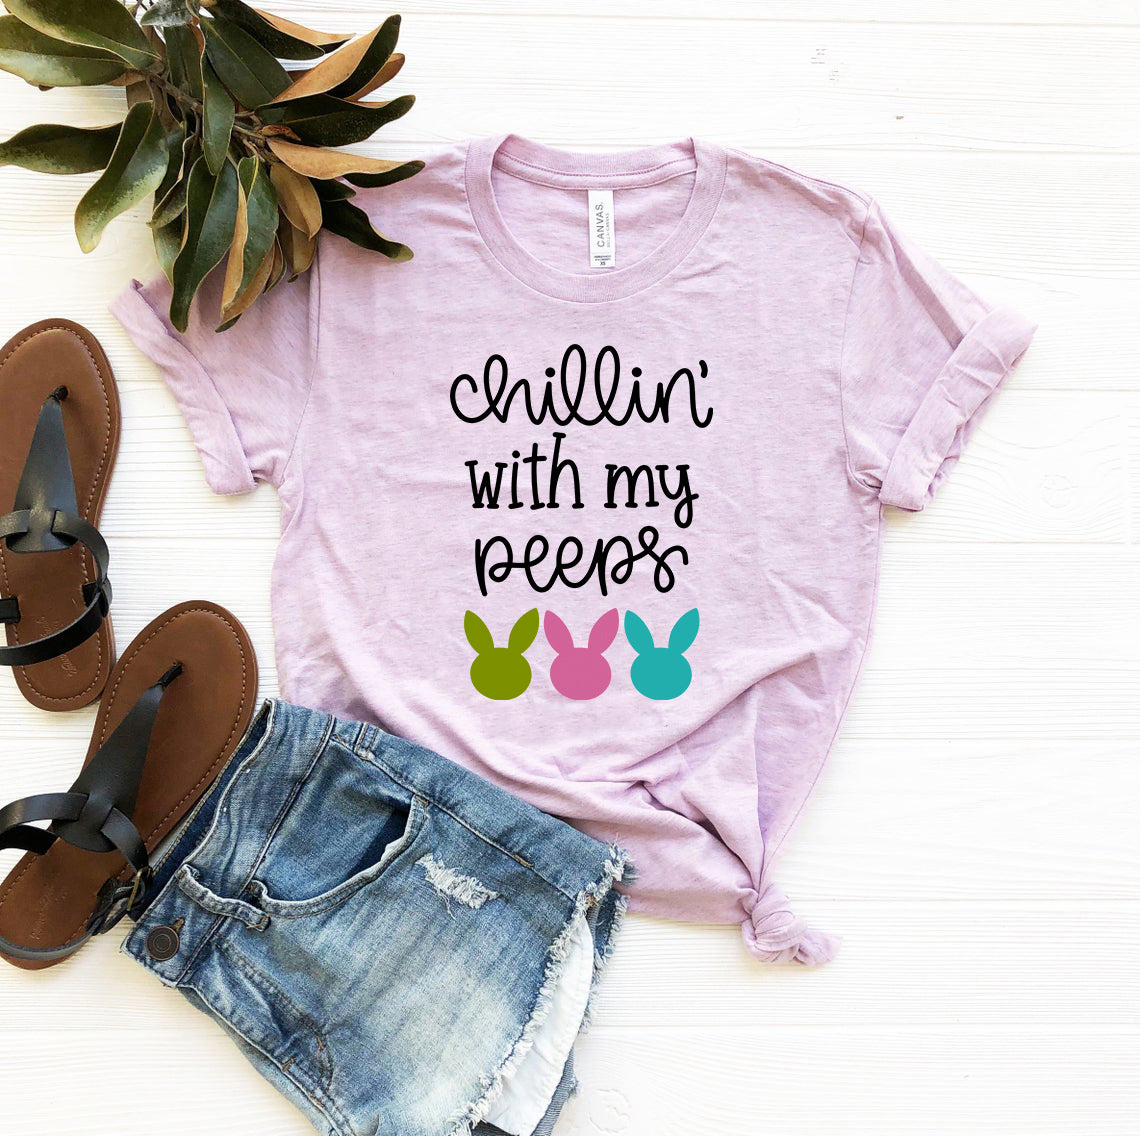 Chillin With My Peeps Shirt | CozyCouture® - Stringspeed